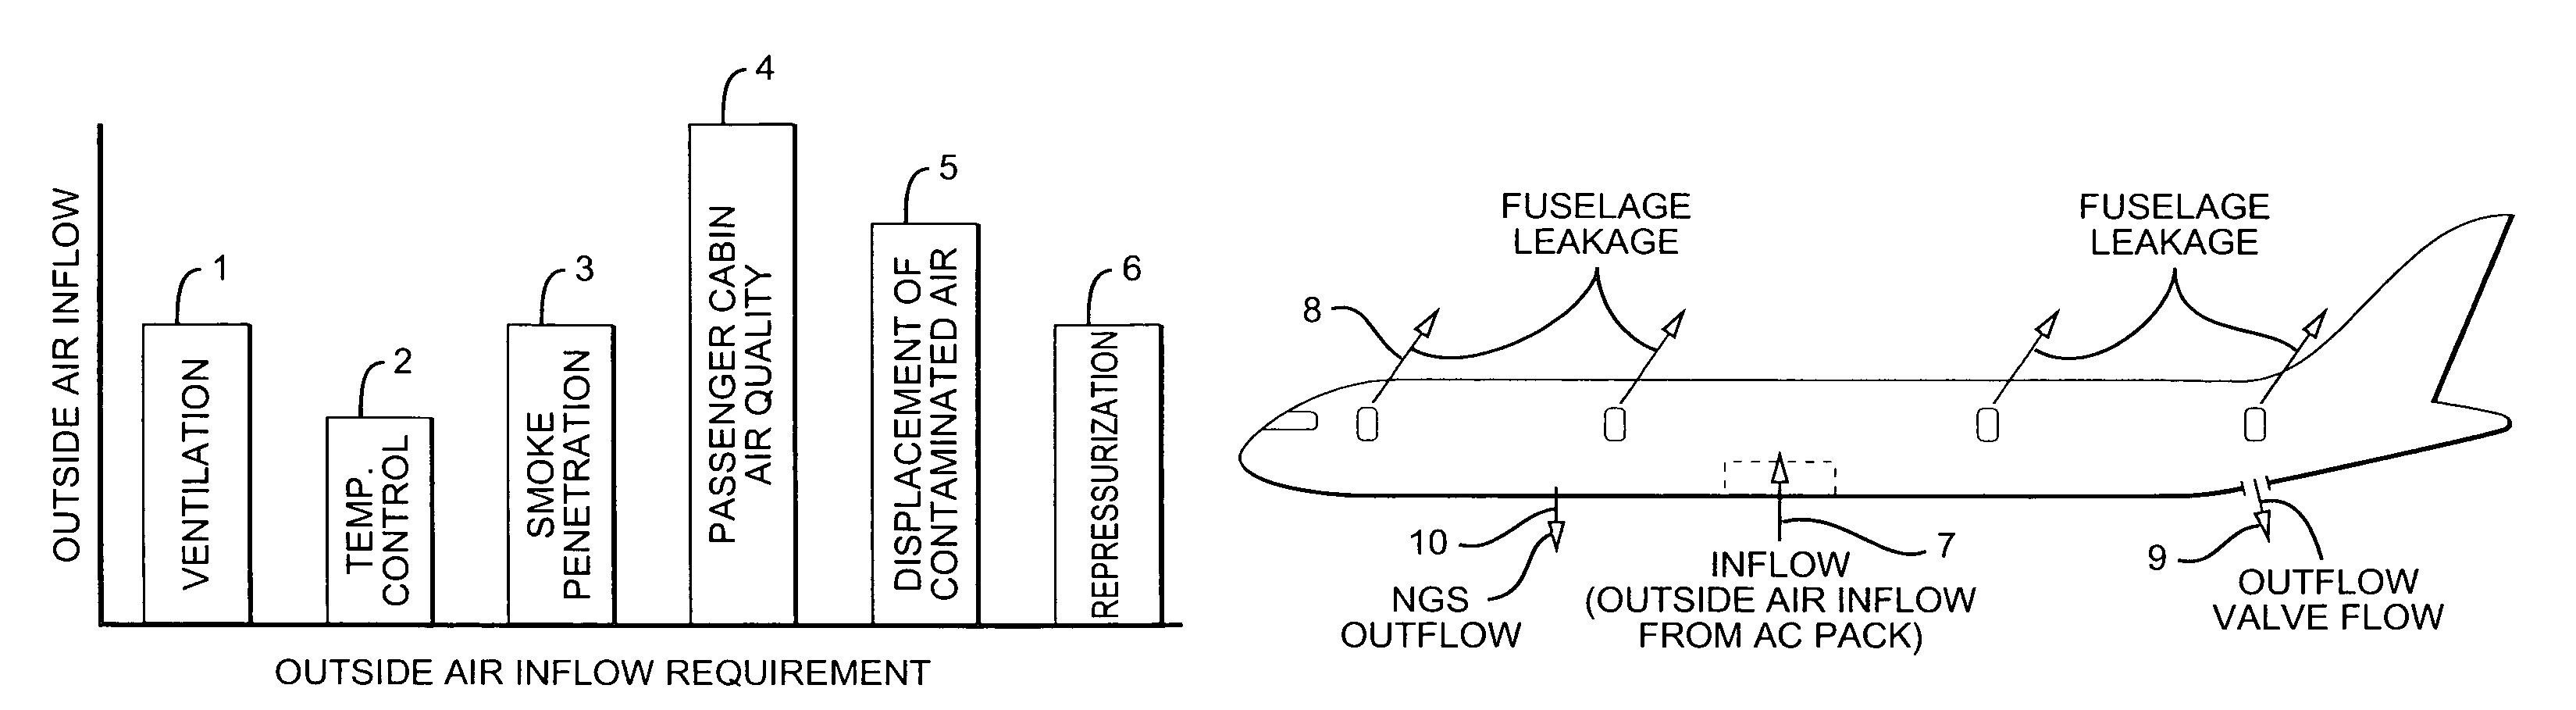 Method for reducing outside air inflow required for aircraft cabin air quality